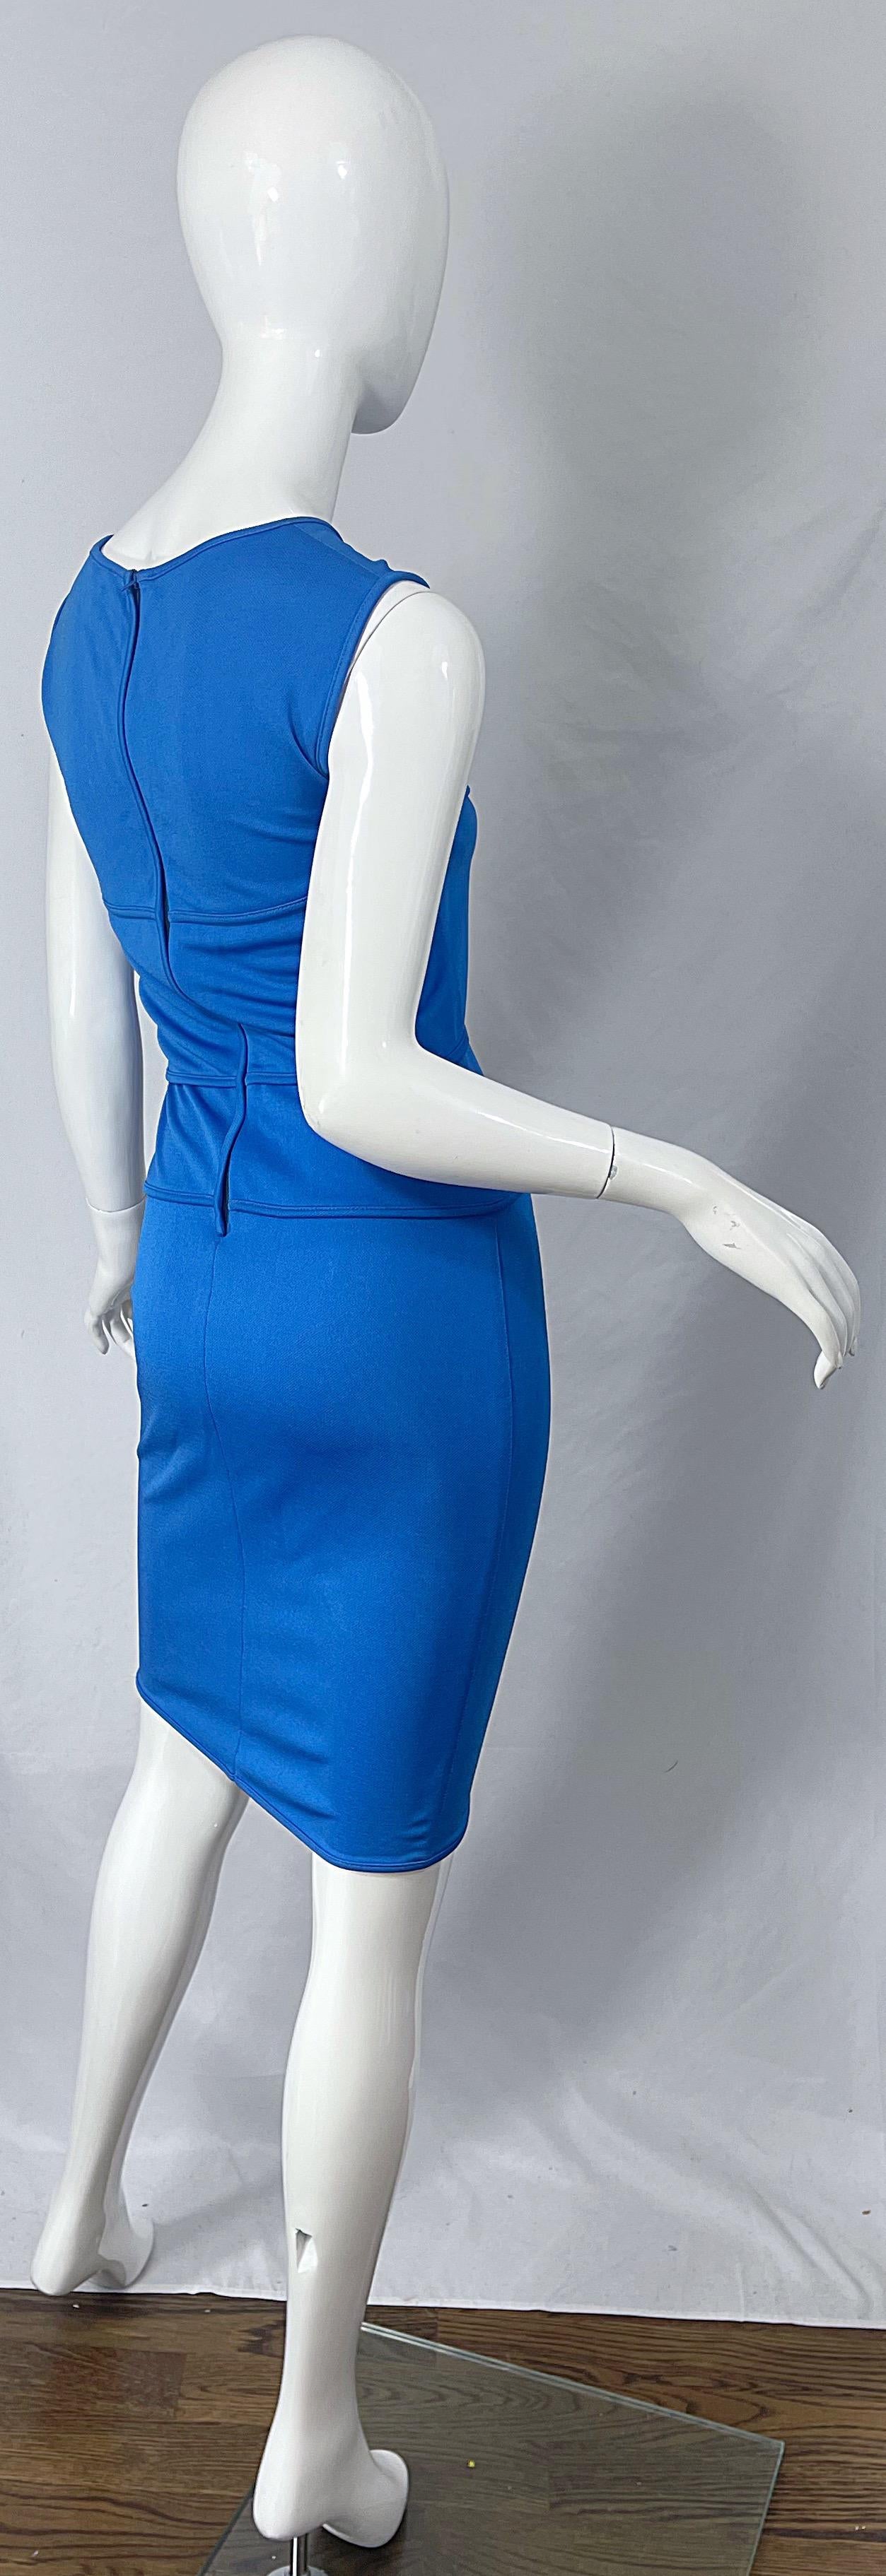 Thierry Mugler 1980s Blue Cut Out Vintage Body Con 80s Dress Size 44 For Sale 6